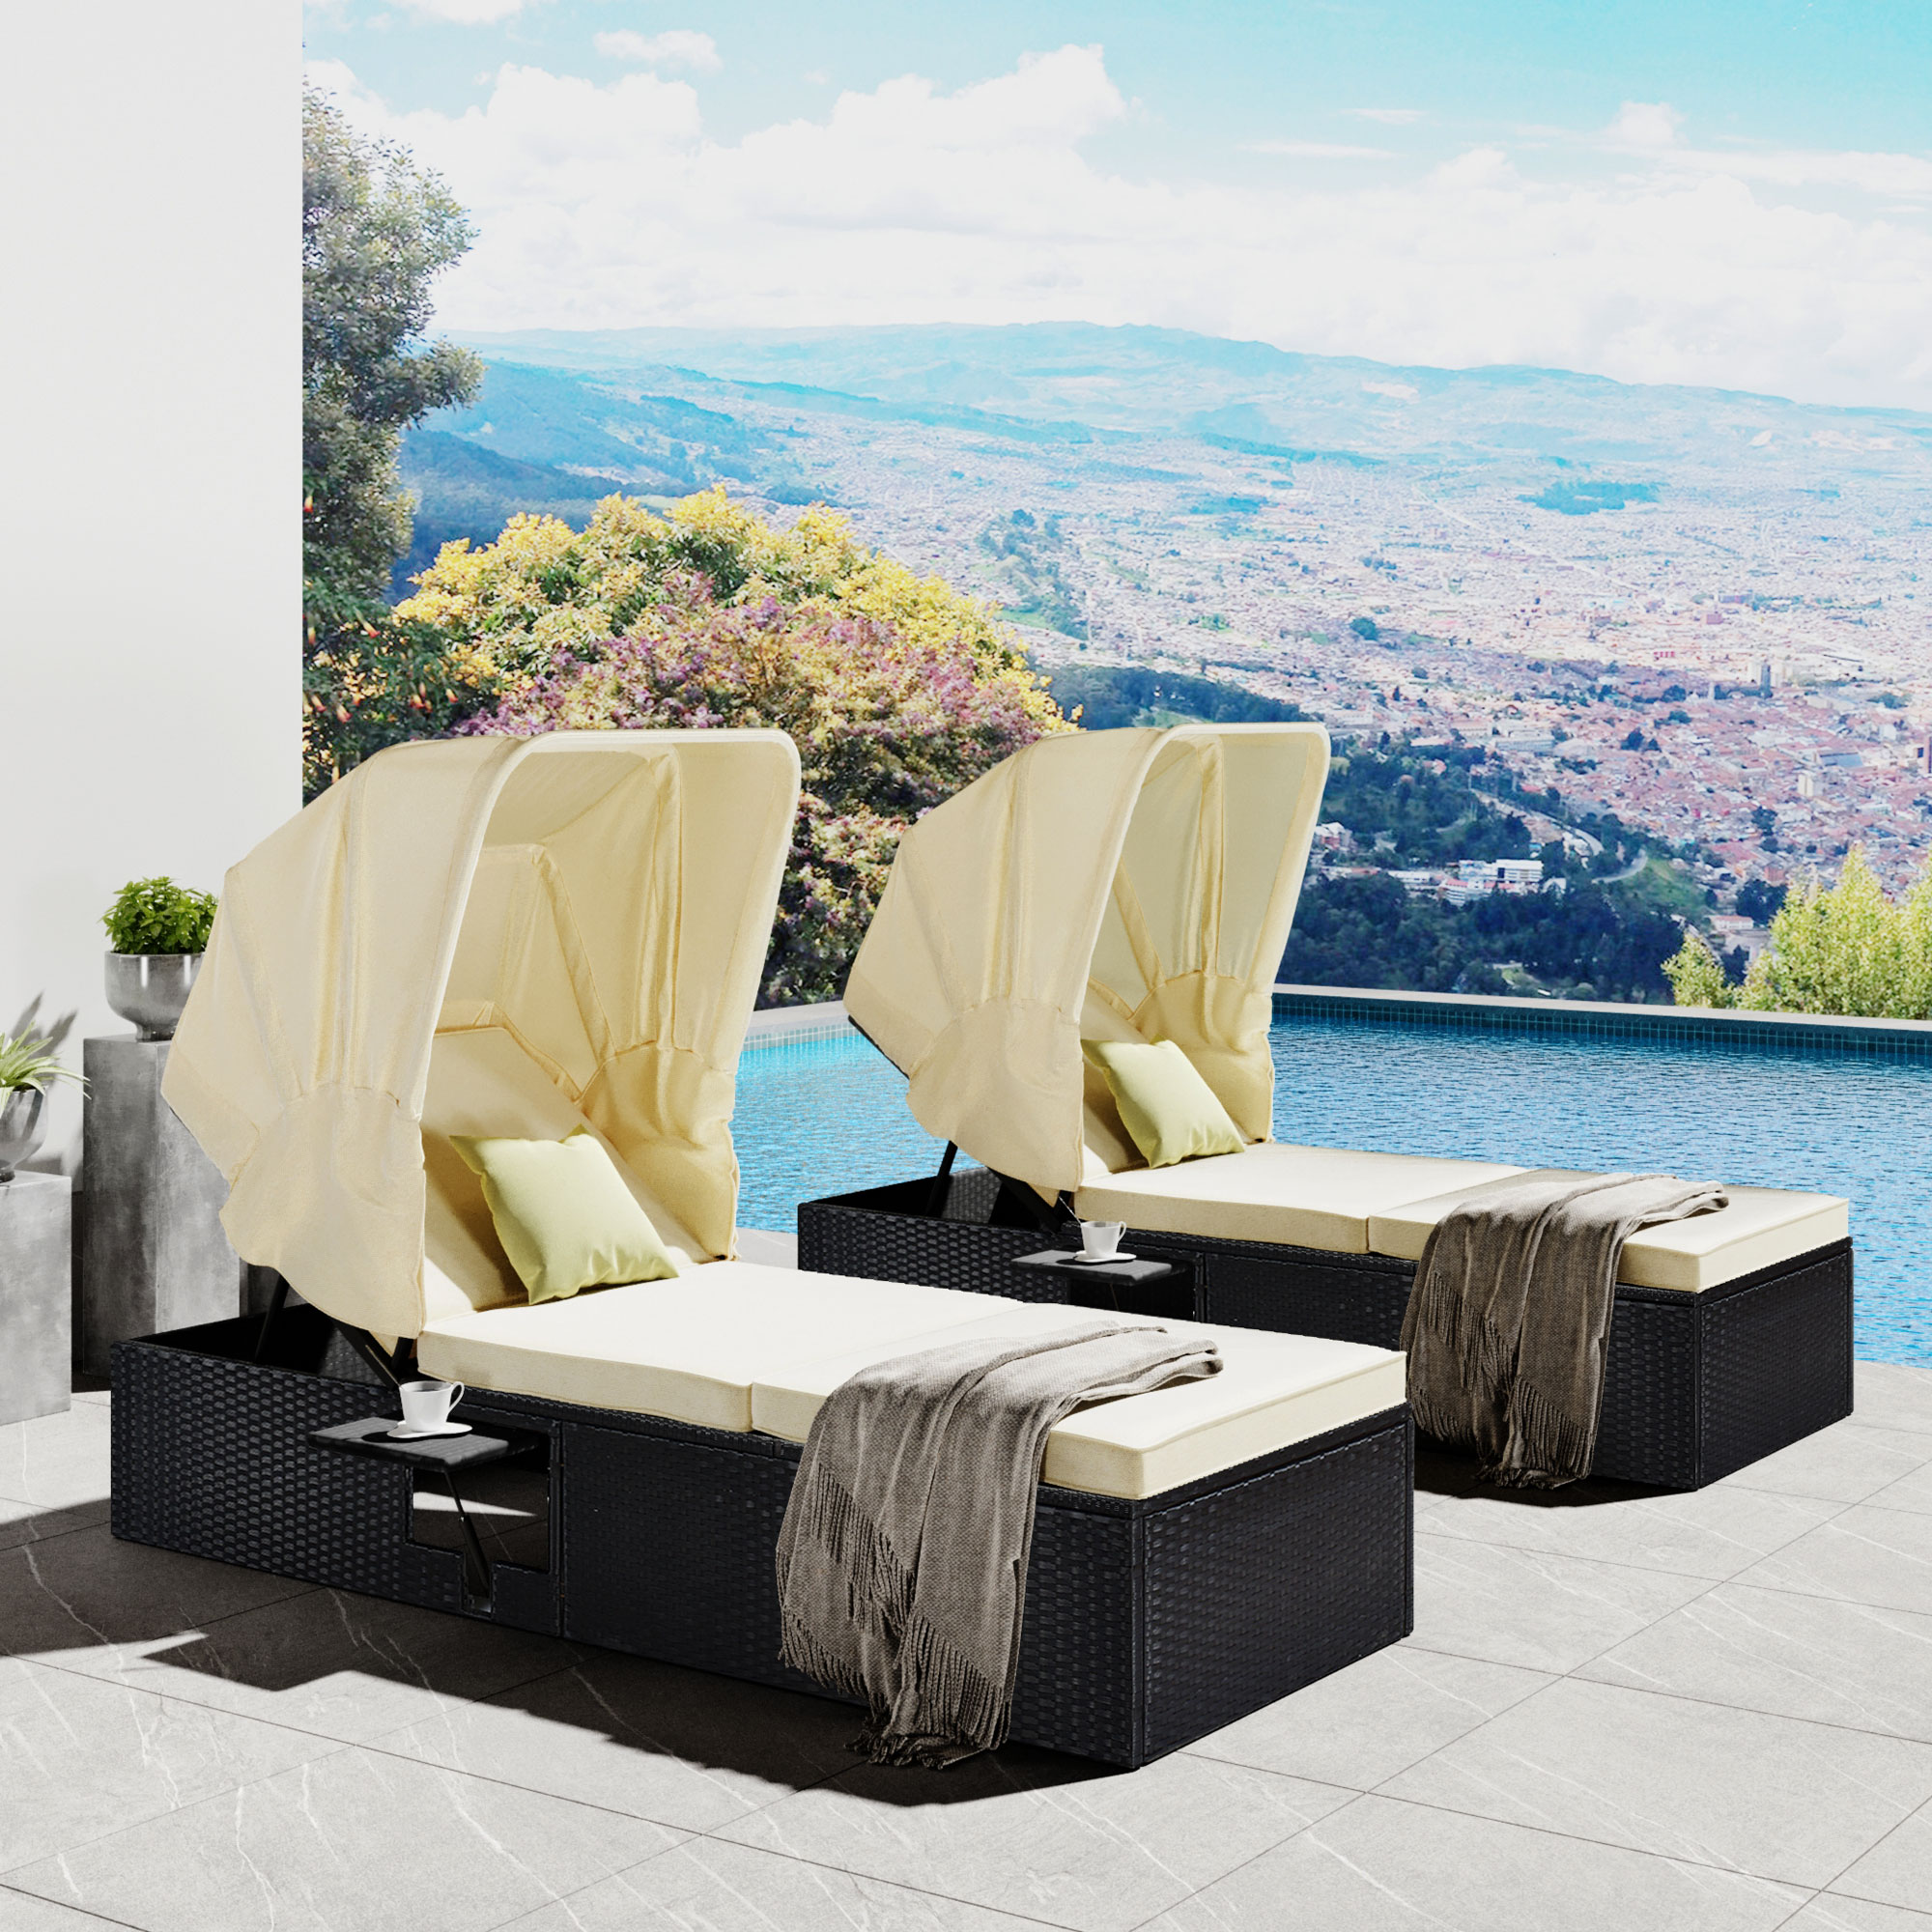 Outdoor PE Wicker Chaise Lounge, SYNGAR 2 Pieces Adjustable Reclining Chairs W/ Canopy and Cup Table, Patio Sun Lounger Set with Removable Cushion, Chaise Set for Poolside Garden Porch, Beige, D7331 - image 1 of 12